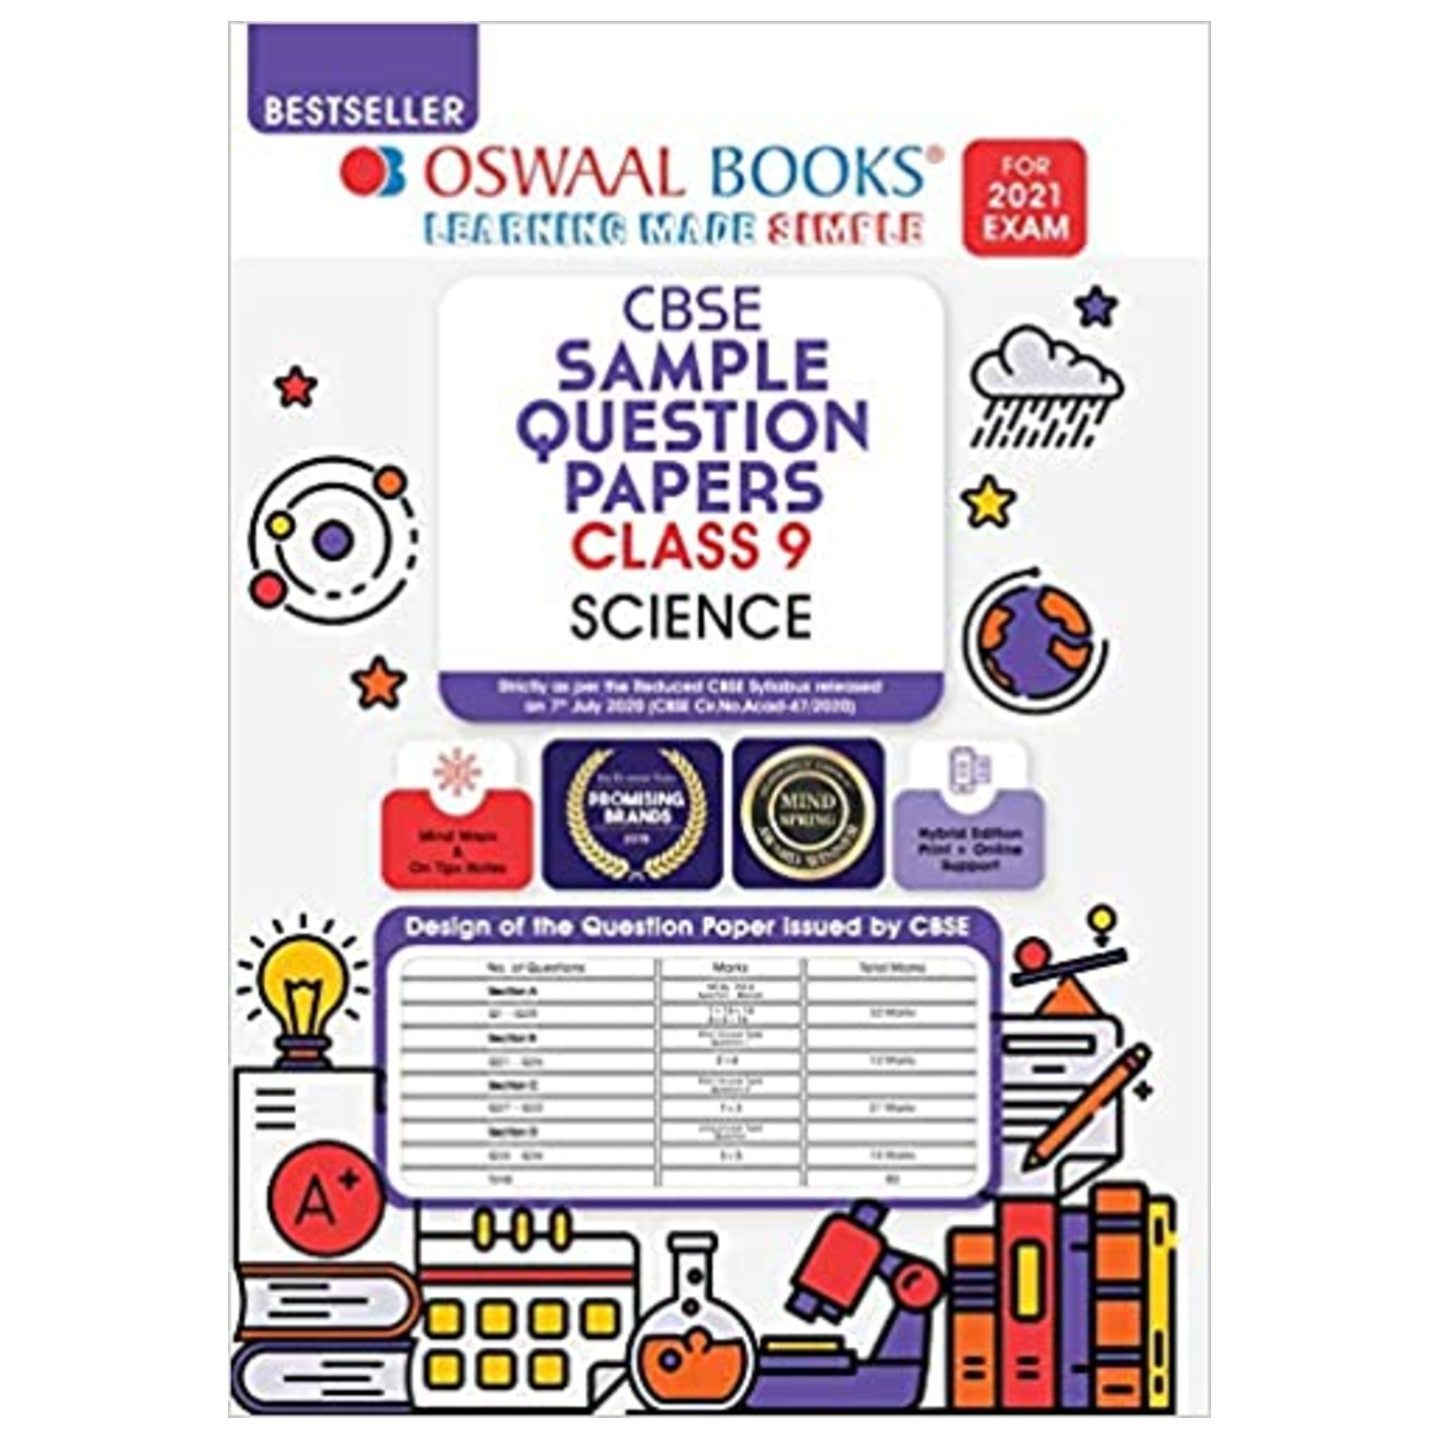 Oswaal CBSE Sample Question Paper Class 9 sceince book